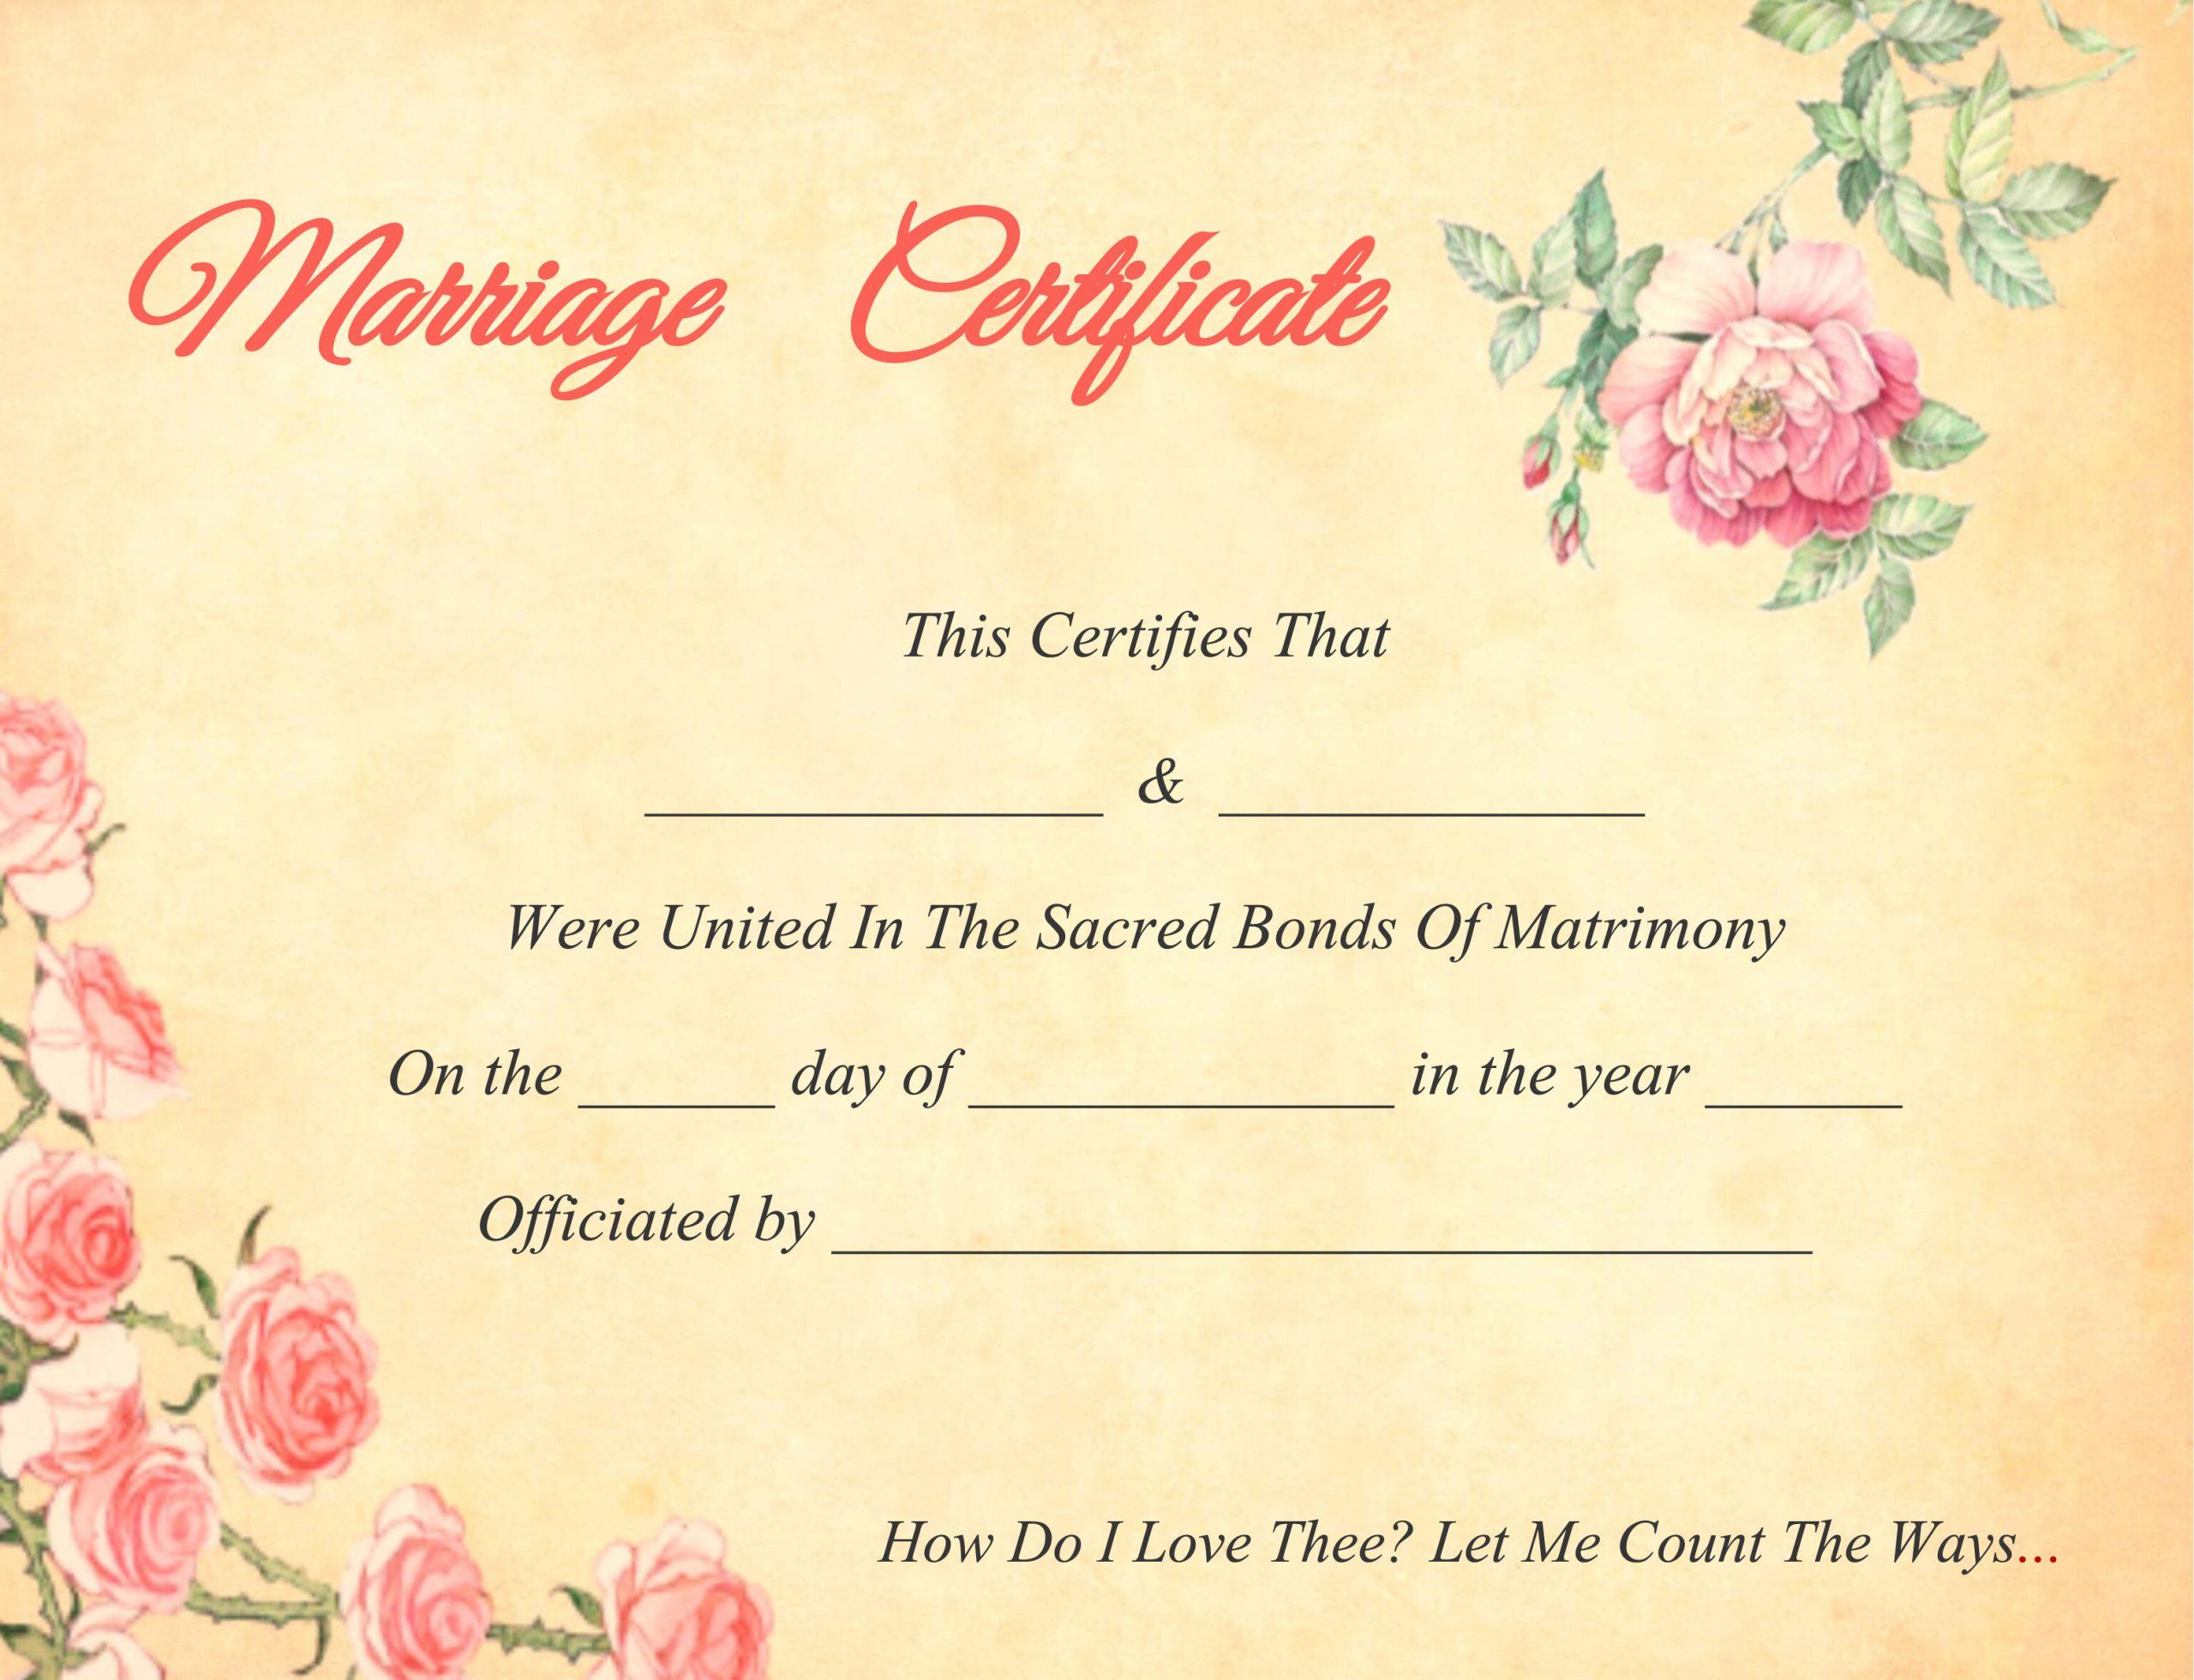 blank-marriage-certificate-template